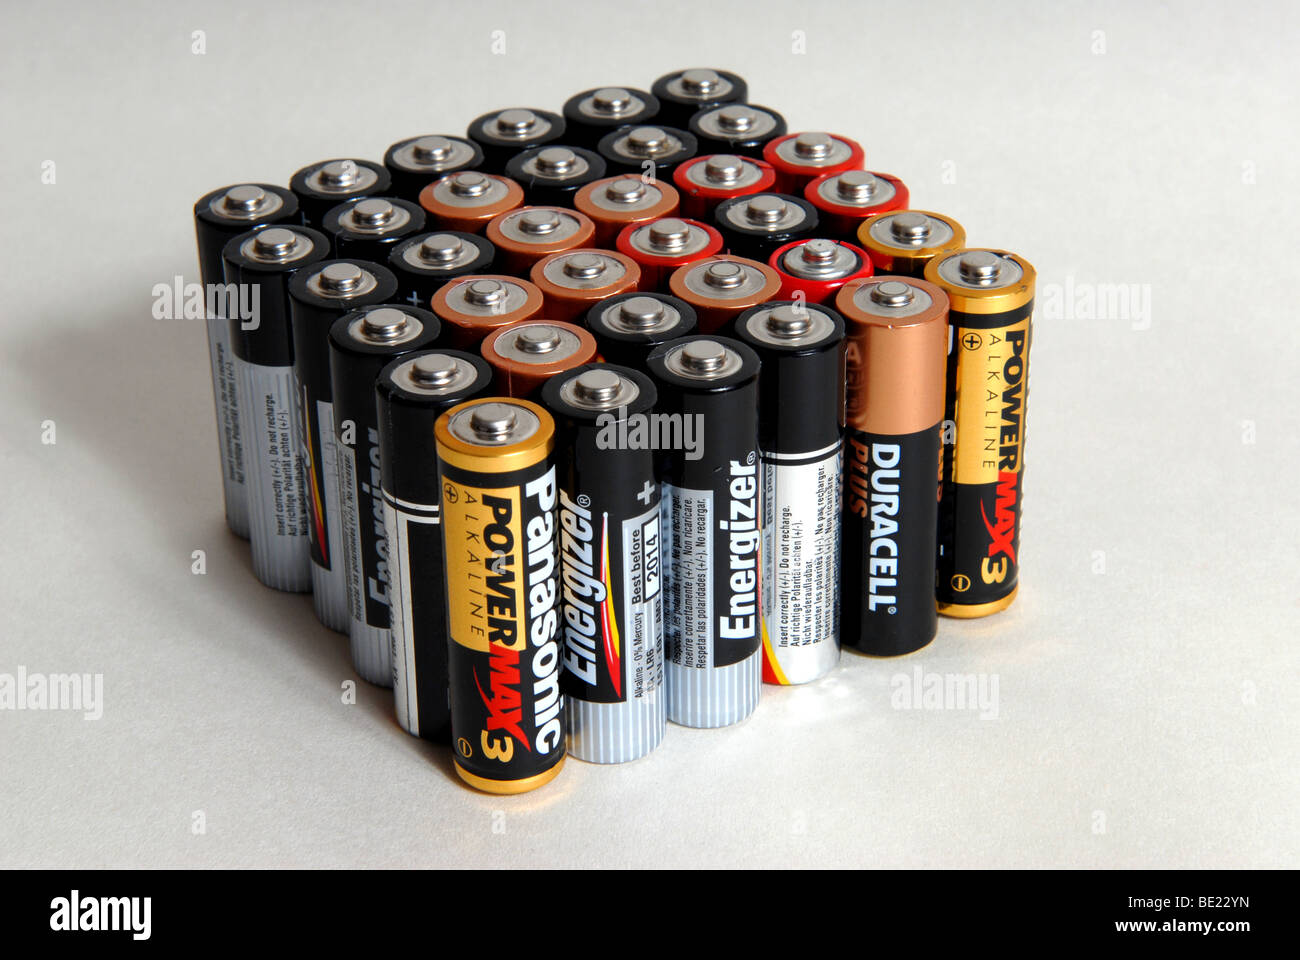 go green and either recycle batteries or use rechargable ones. generic  battery images with a green message Stock Photo - Alamy